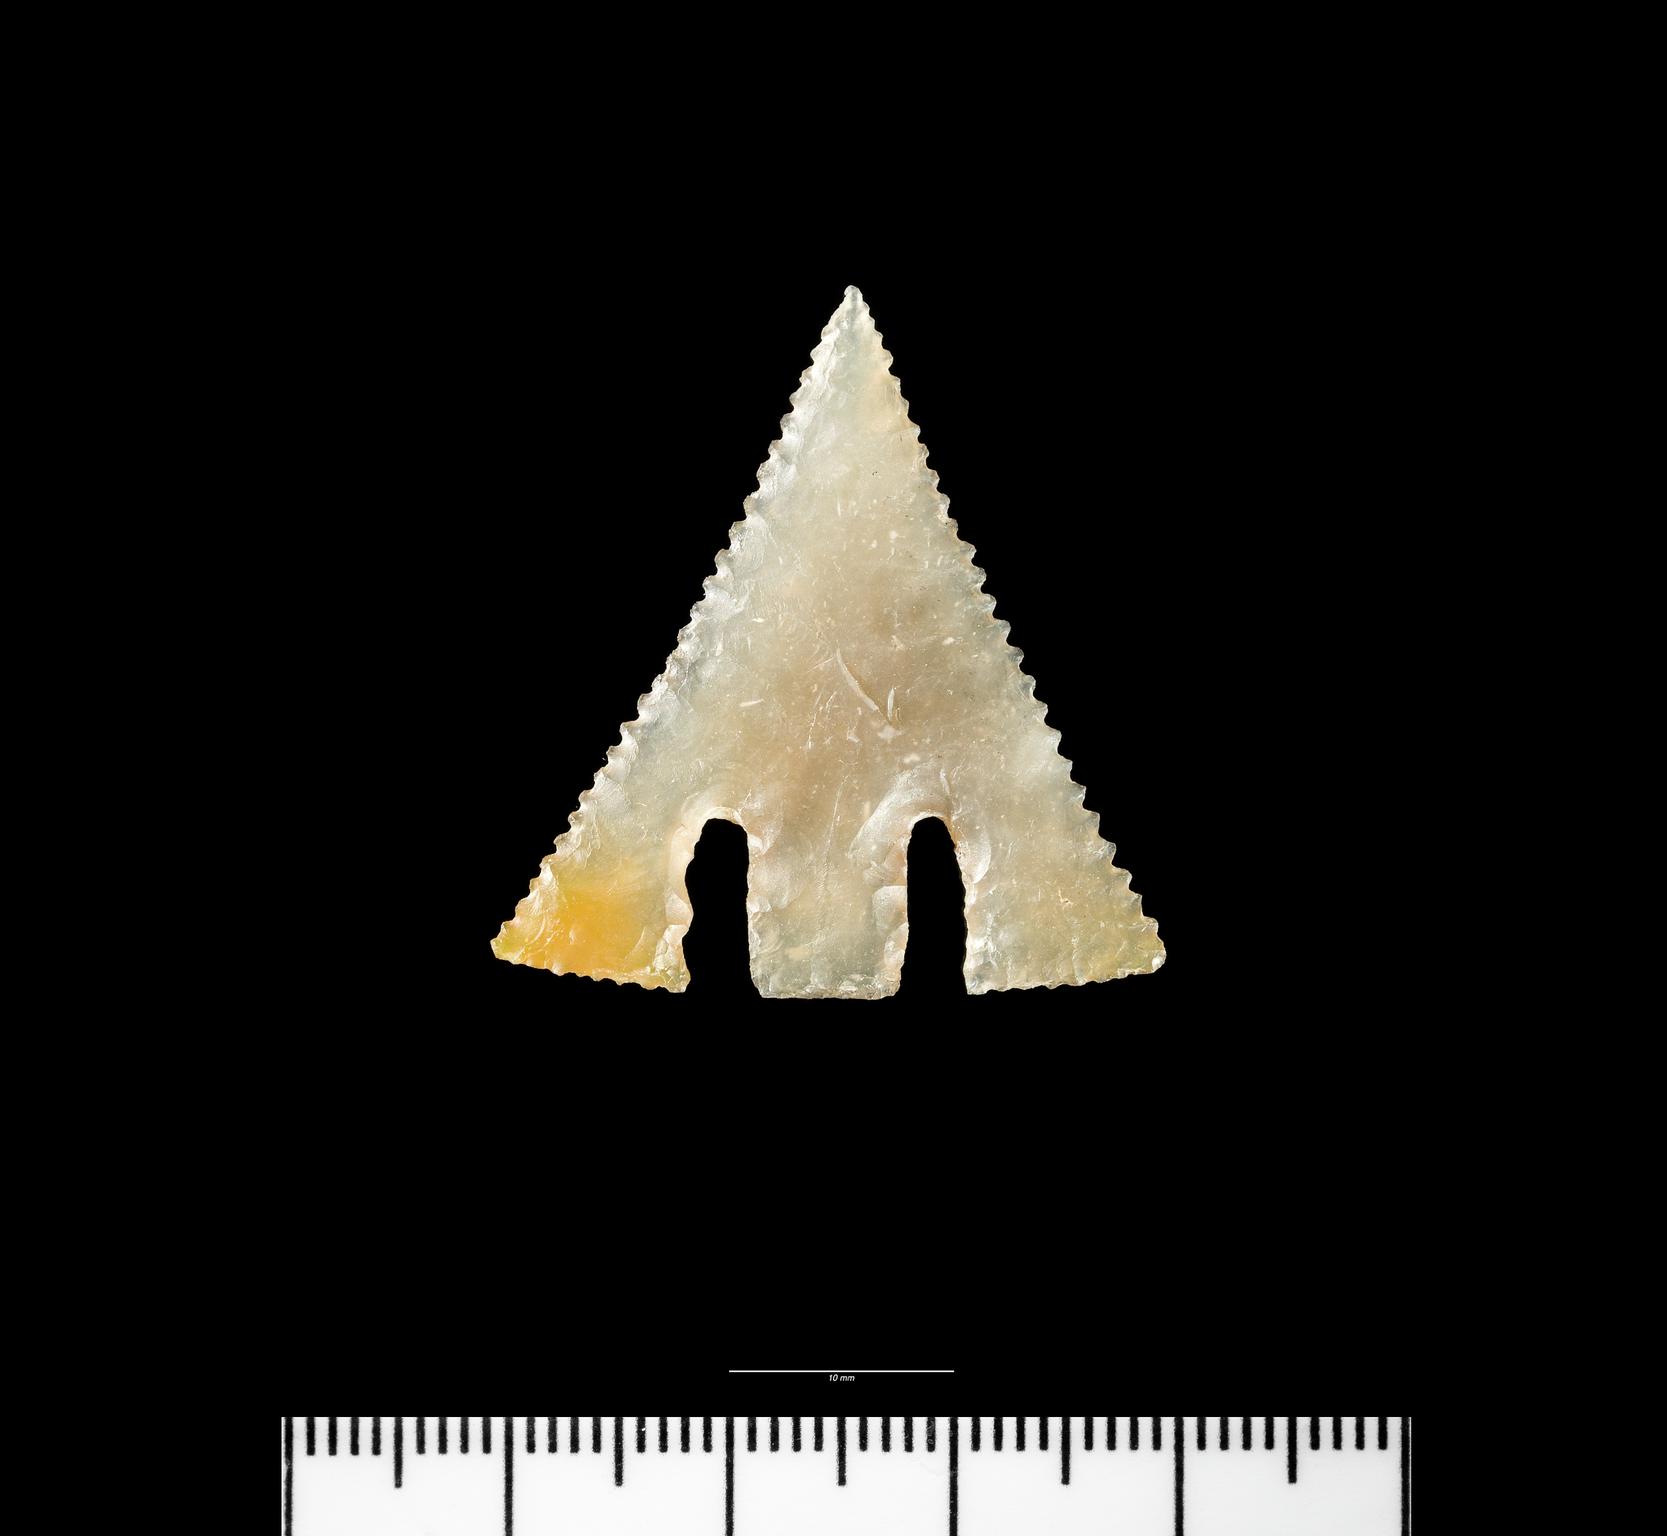 Early Bronze Age flint barbed and tanged arrowhead